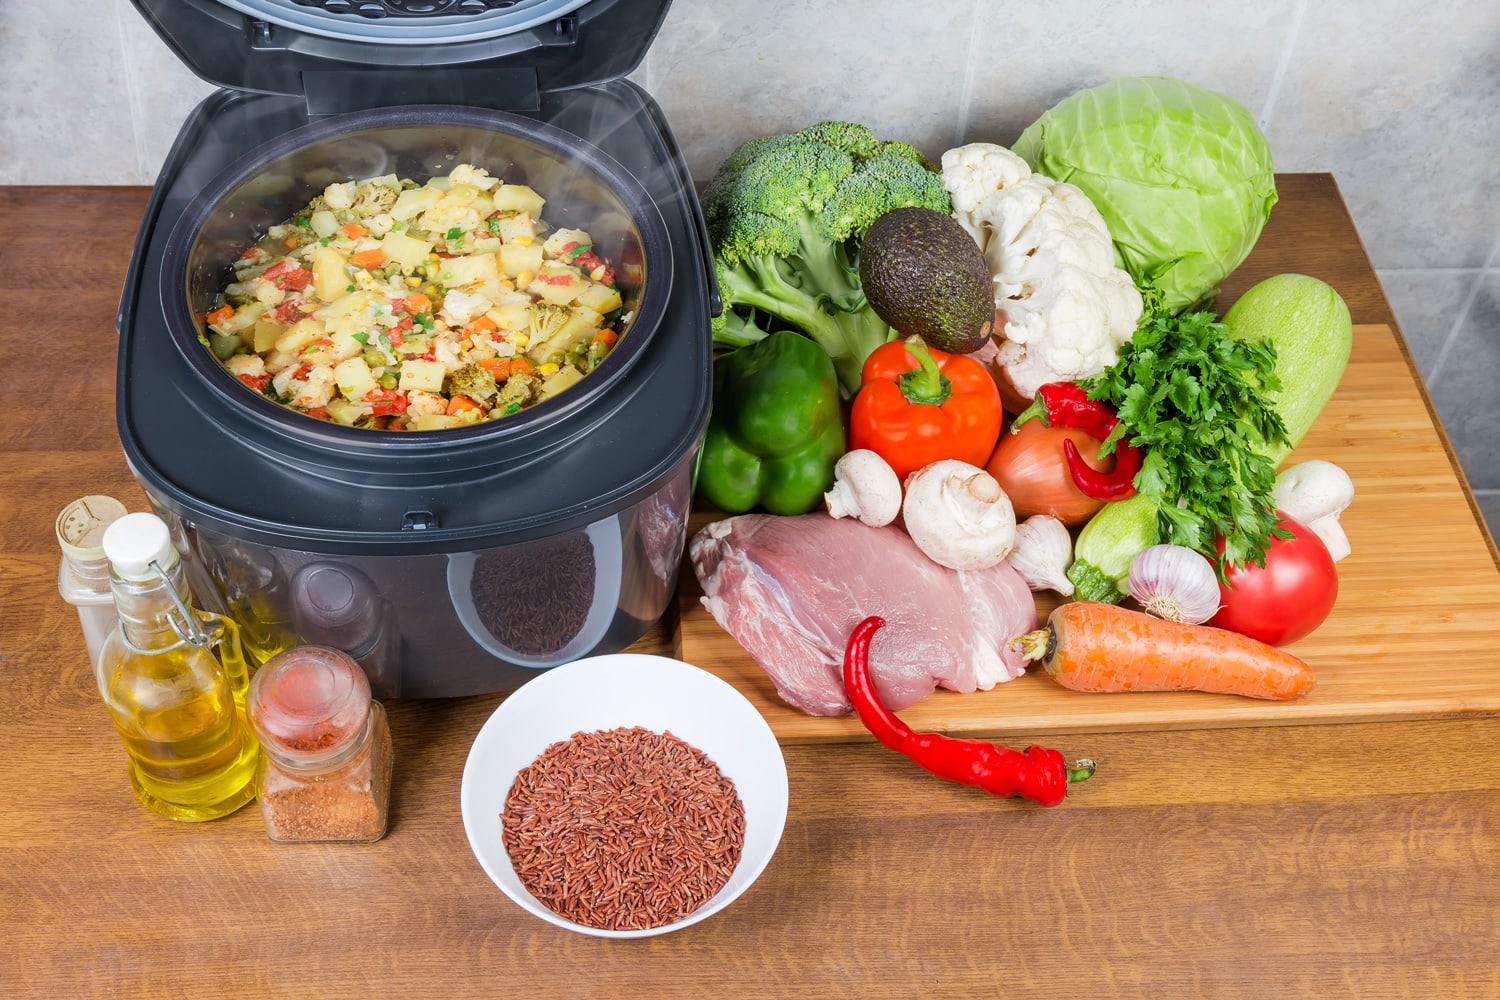 Braised various vegetables in household electric multi-cooker with open lid among of various raw foods on a cook table